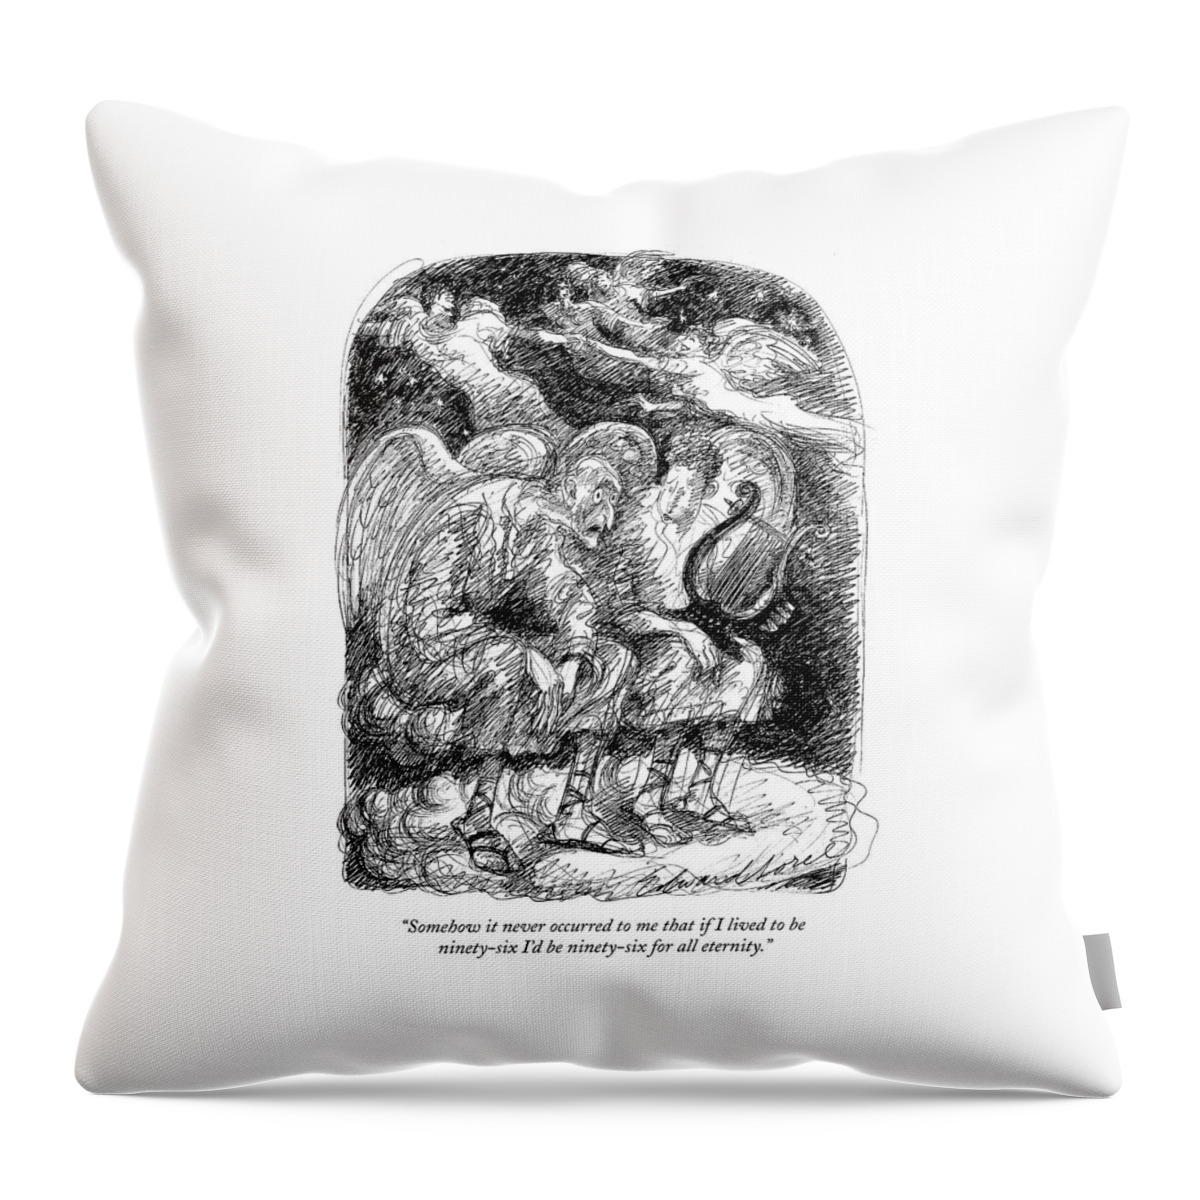 Blasphemy, Yes, But It Was Funny Throw Pillow